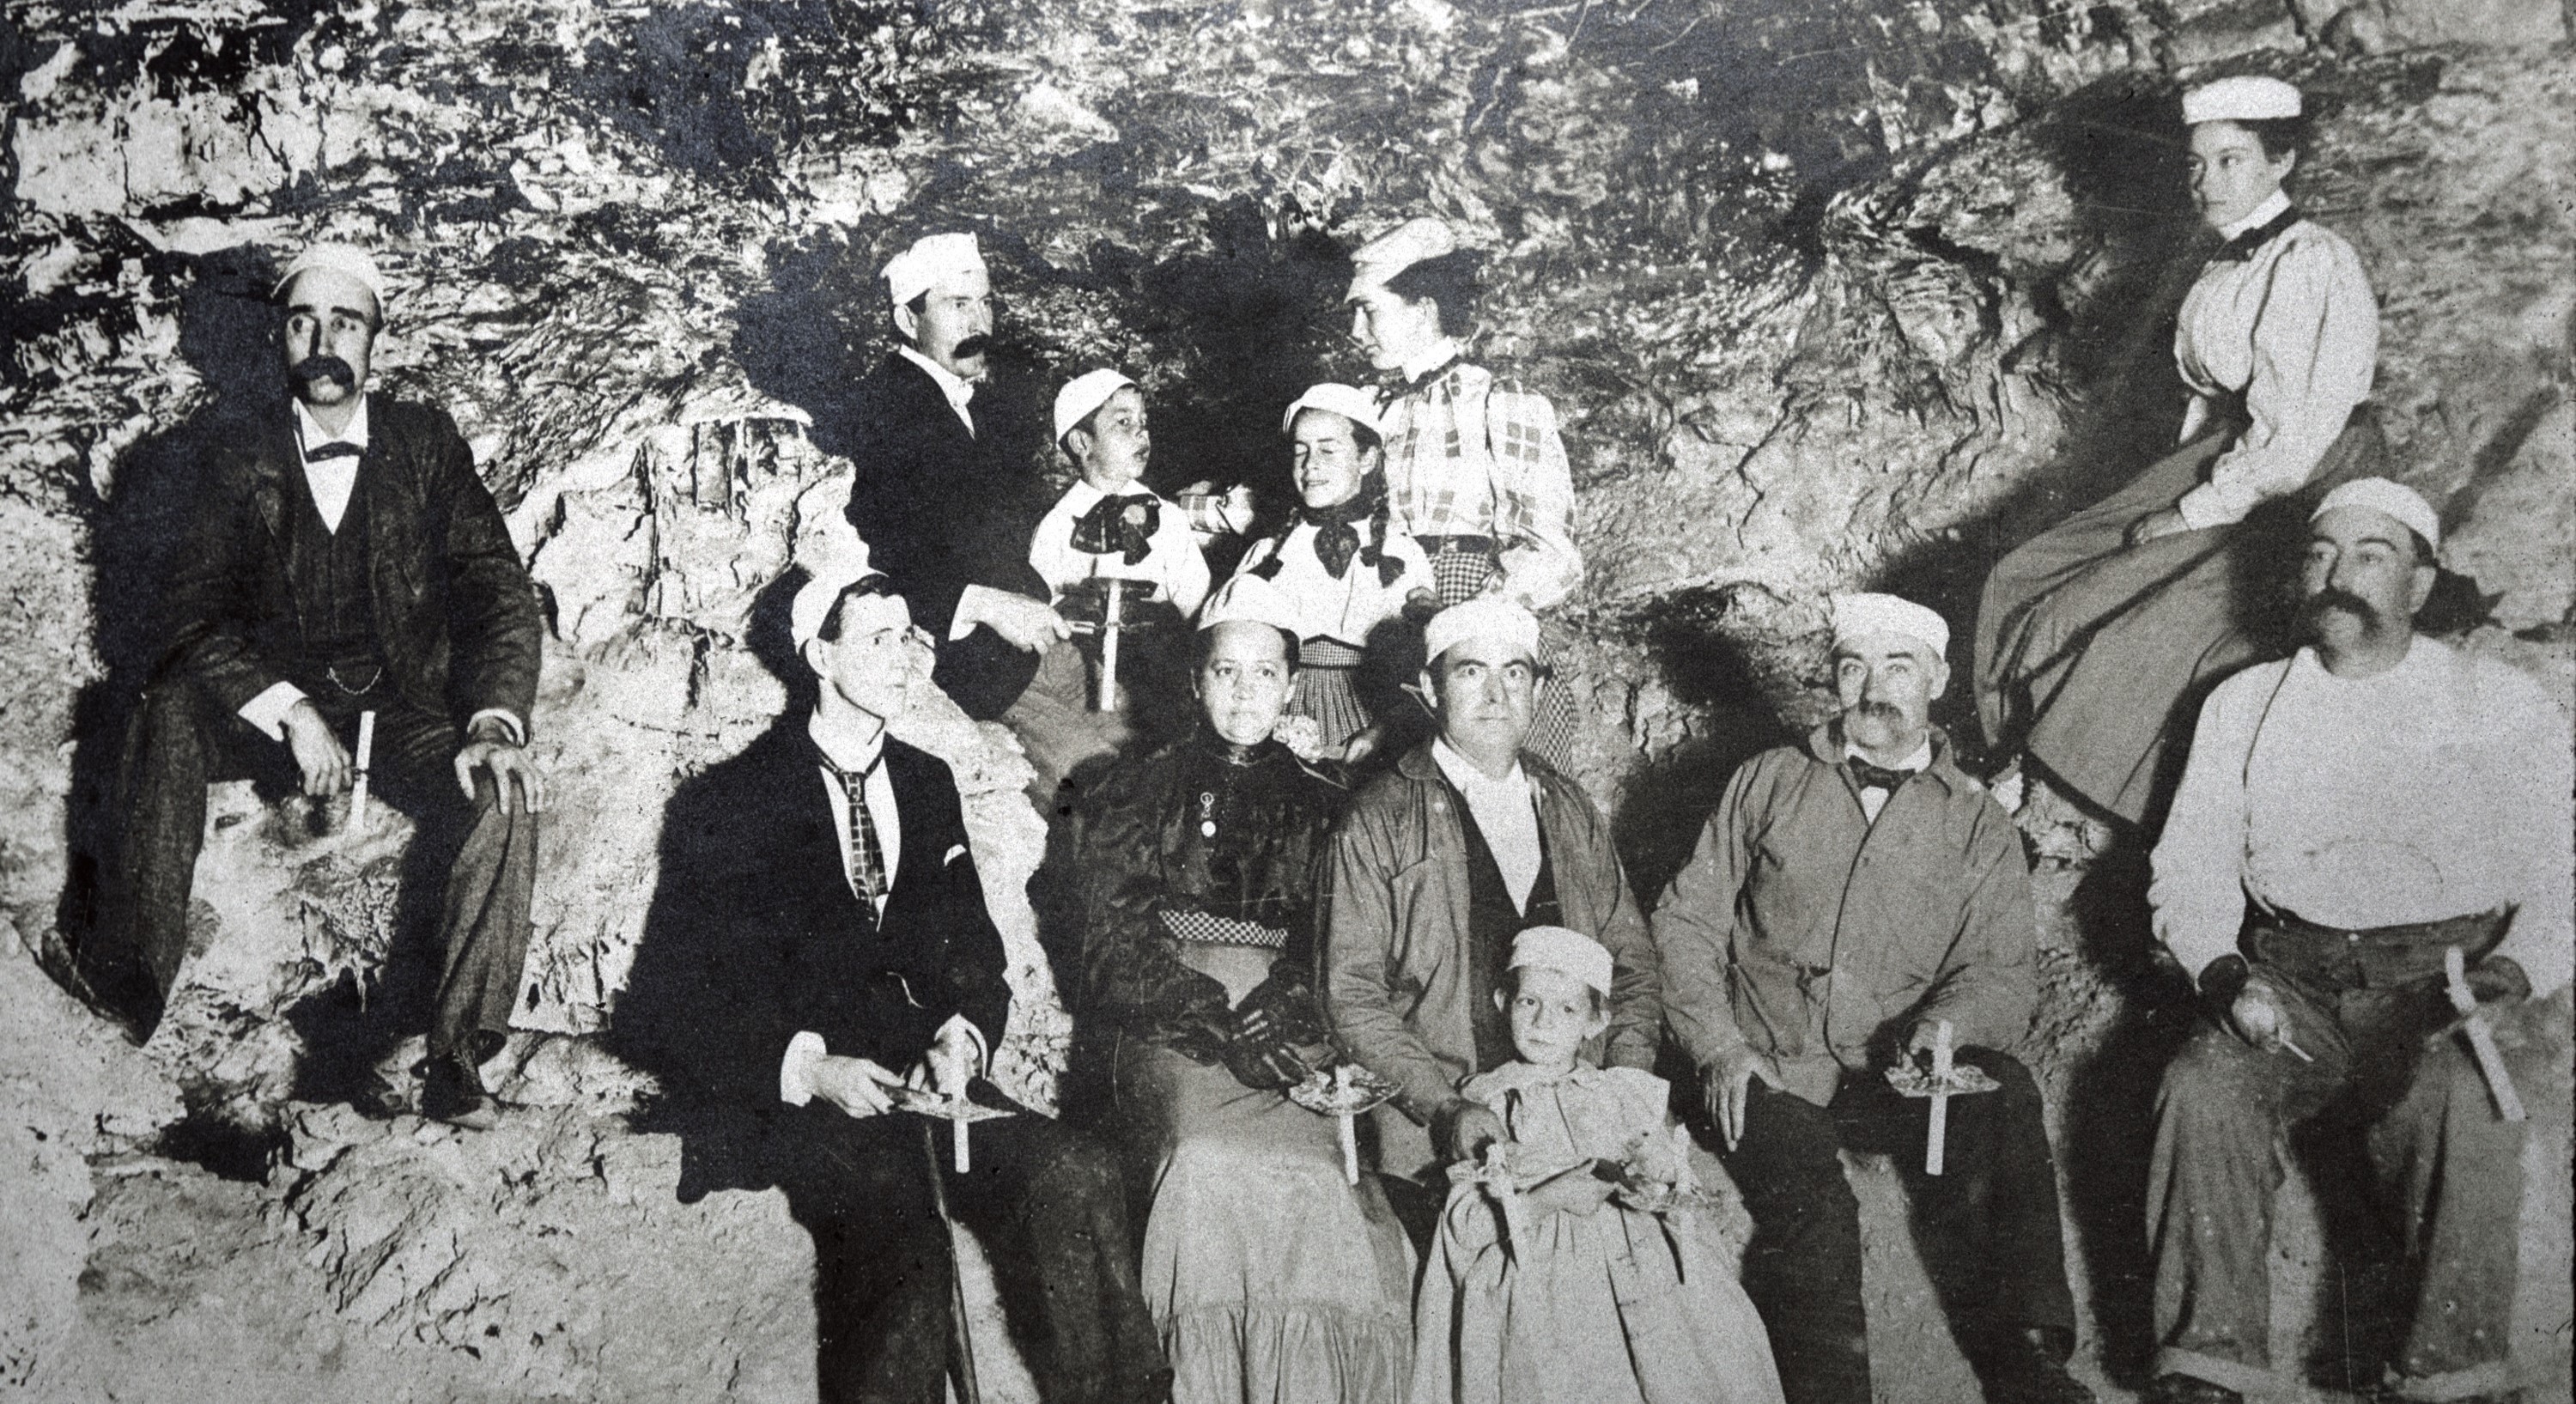 Early Cave Explorers (1881-1903) - Wind Cave National Park (U.S. National Park Service)